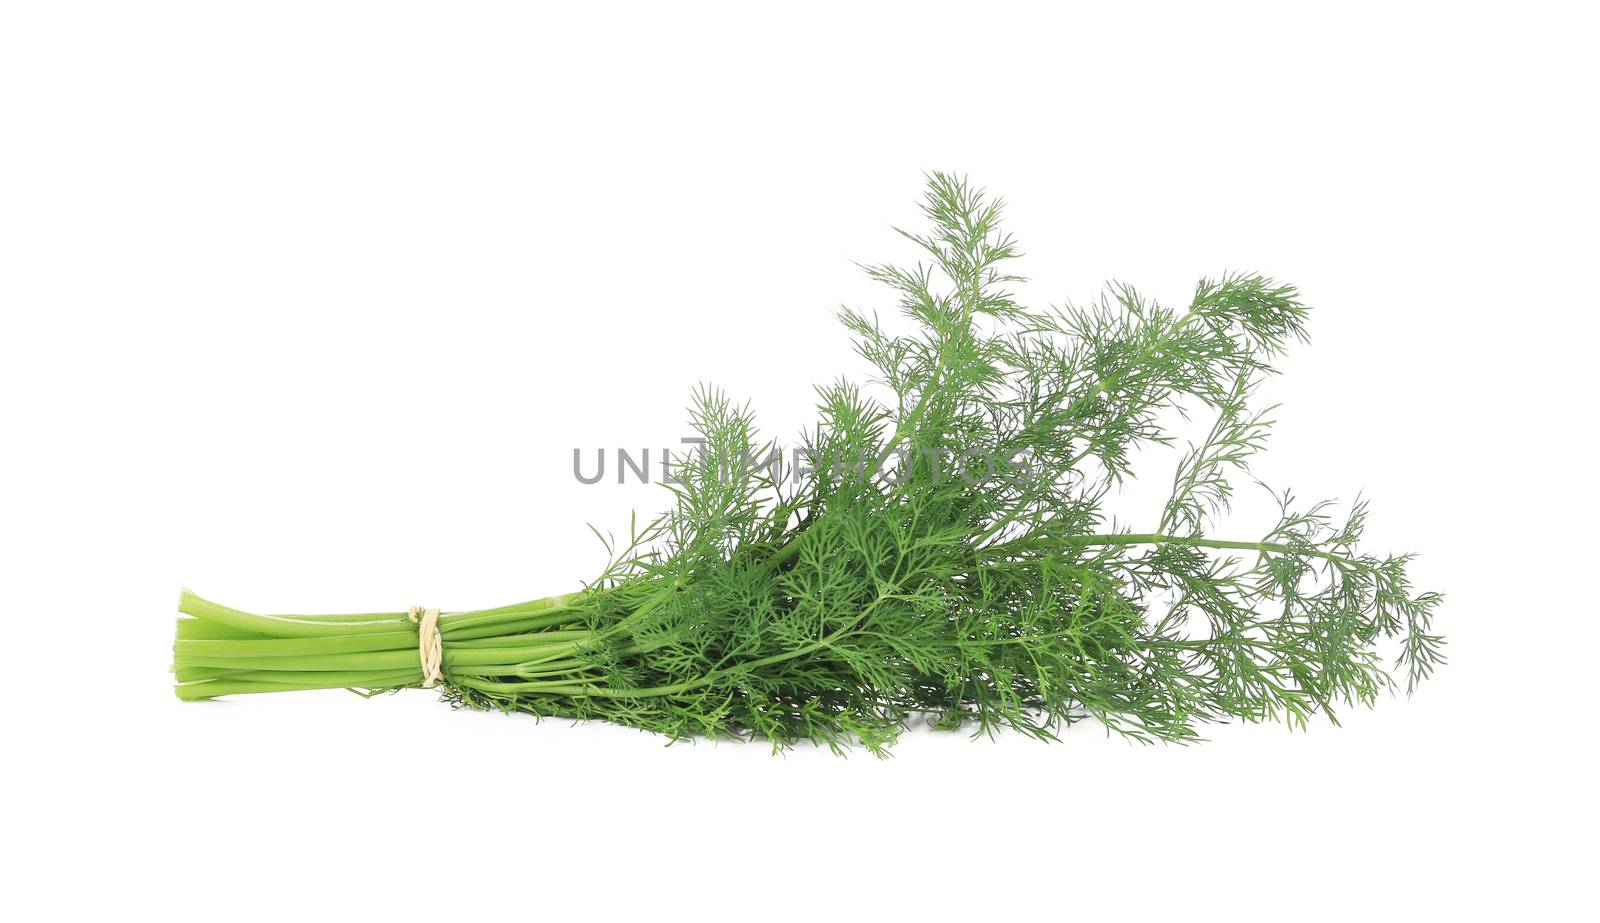 Fresh dill herb. Isolated on a white background.